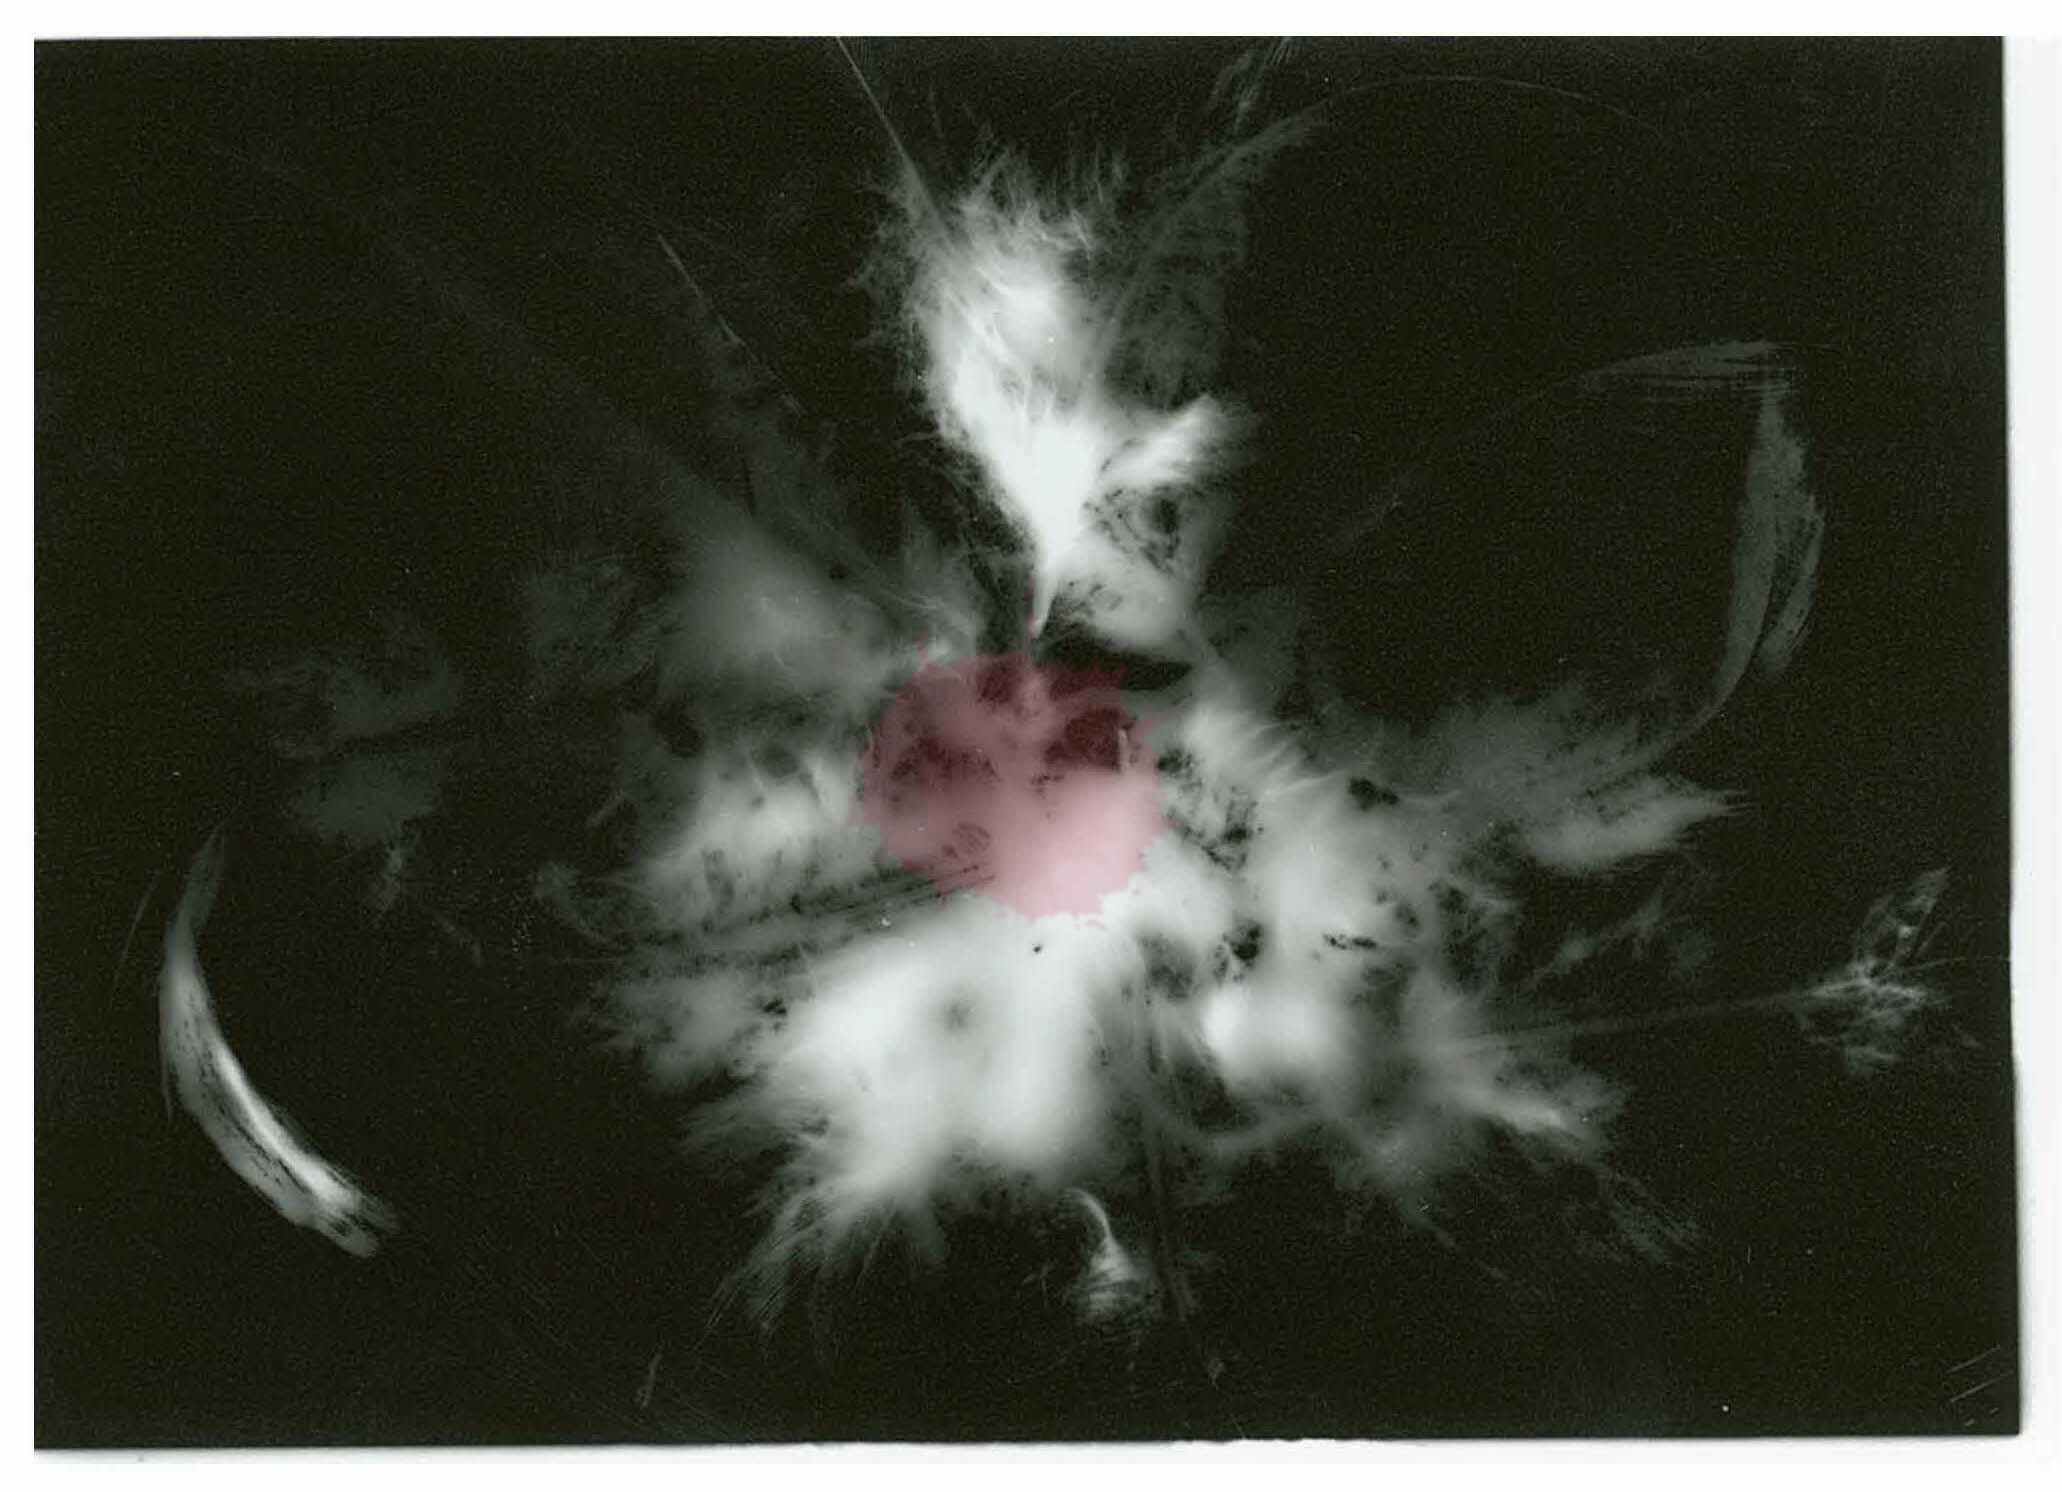 A bouquet of downy faux feathers printed on black & white silver gelatin photo paper - 2018